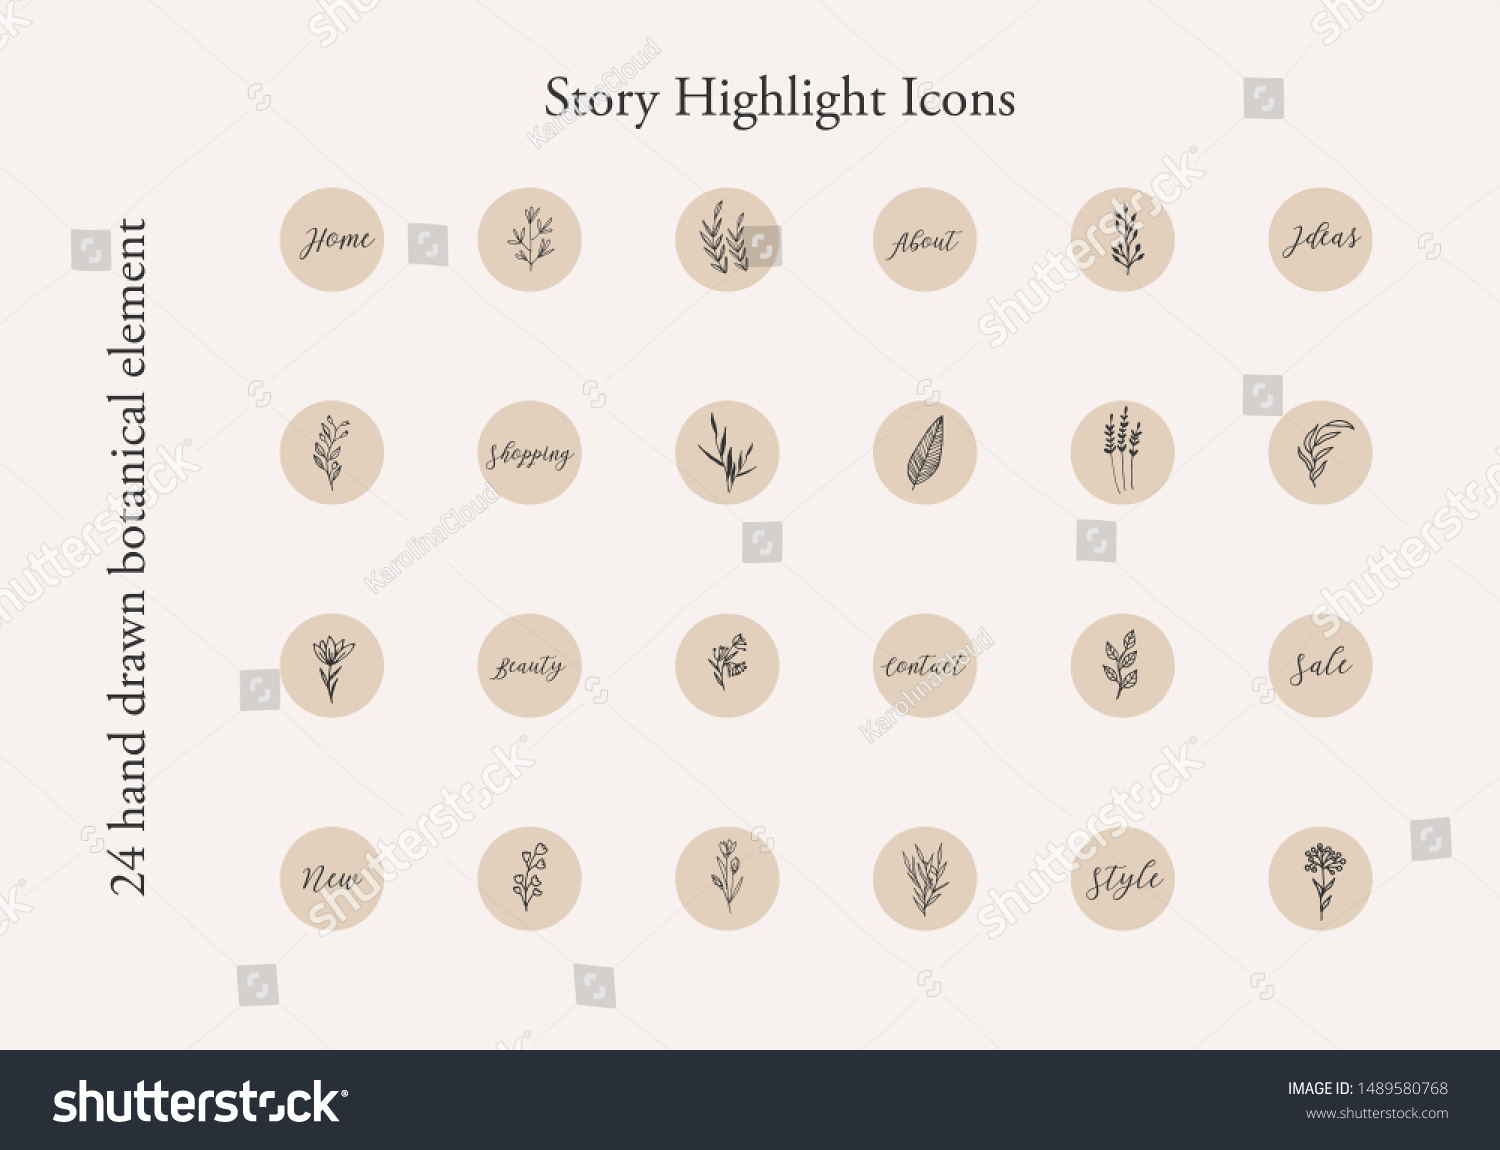 Botanical Instagram Highlight Covers for IG Branding Instant Download Icons for IG Floral 18 Instagram Highlight Icons White and Black